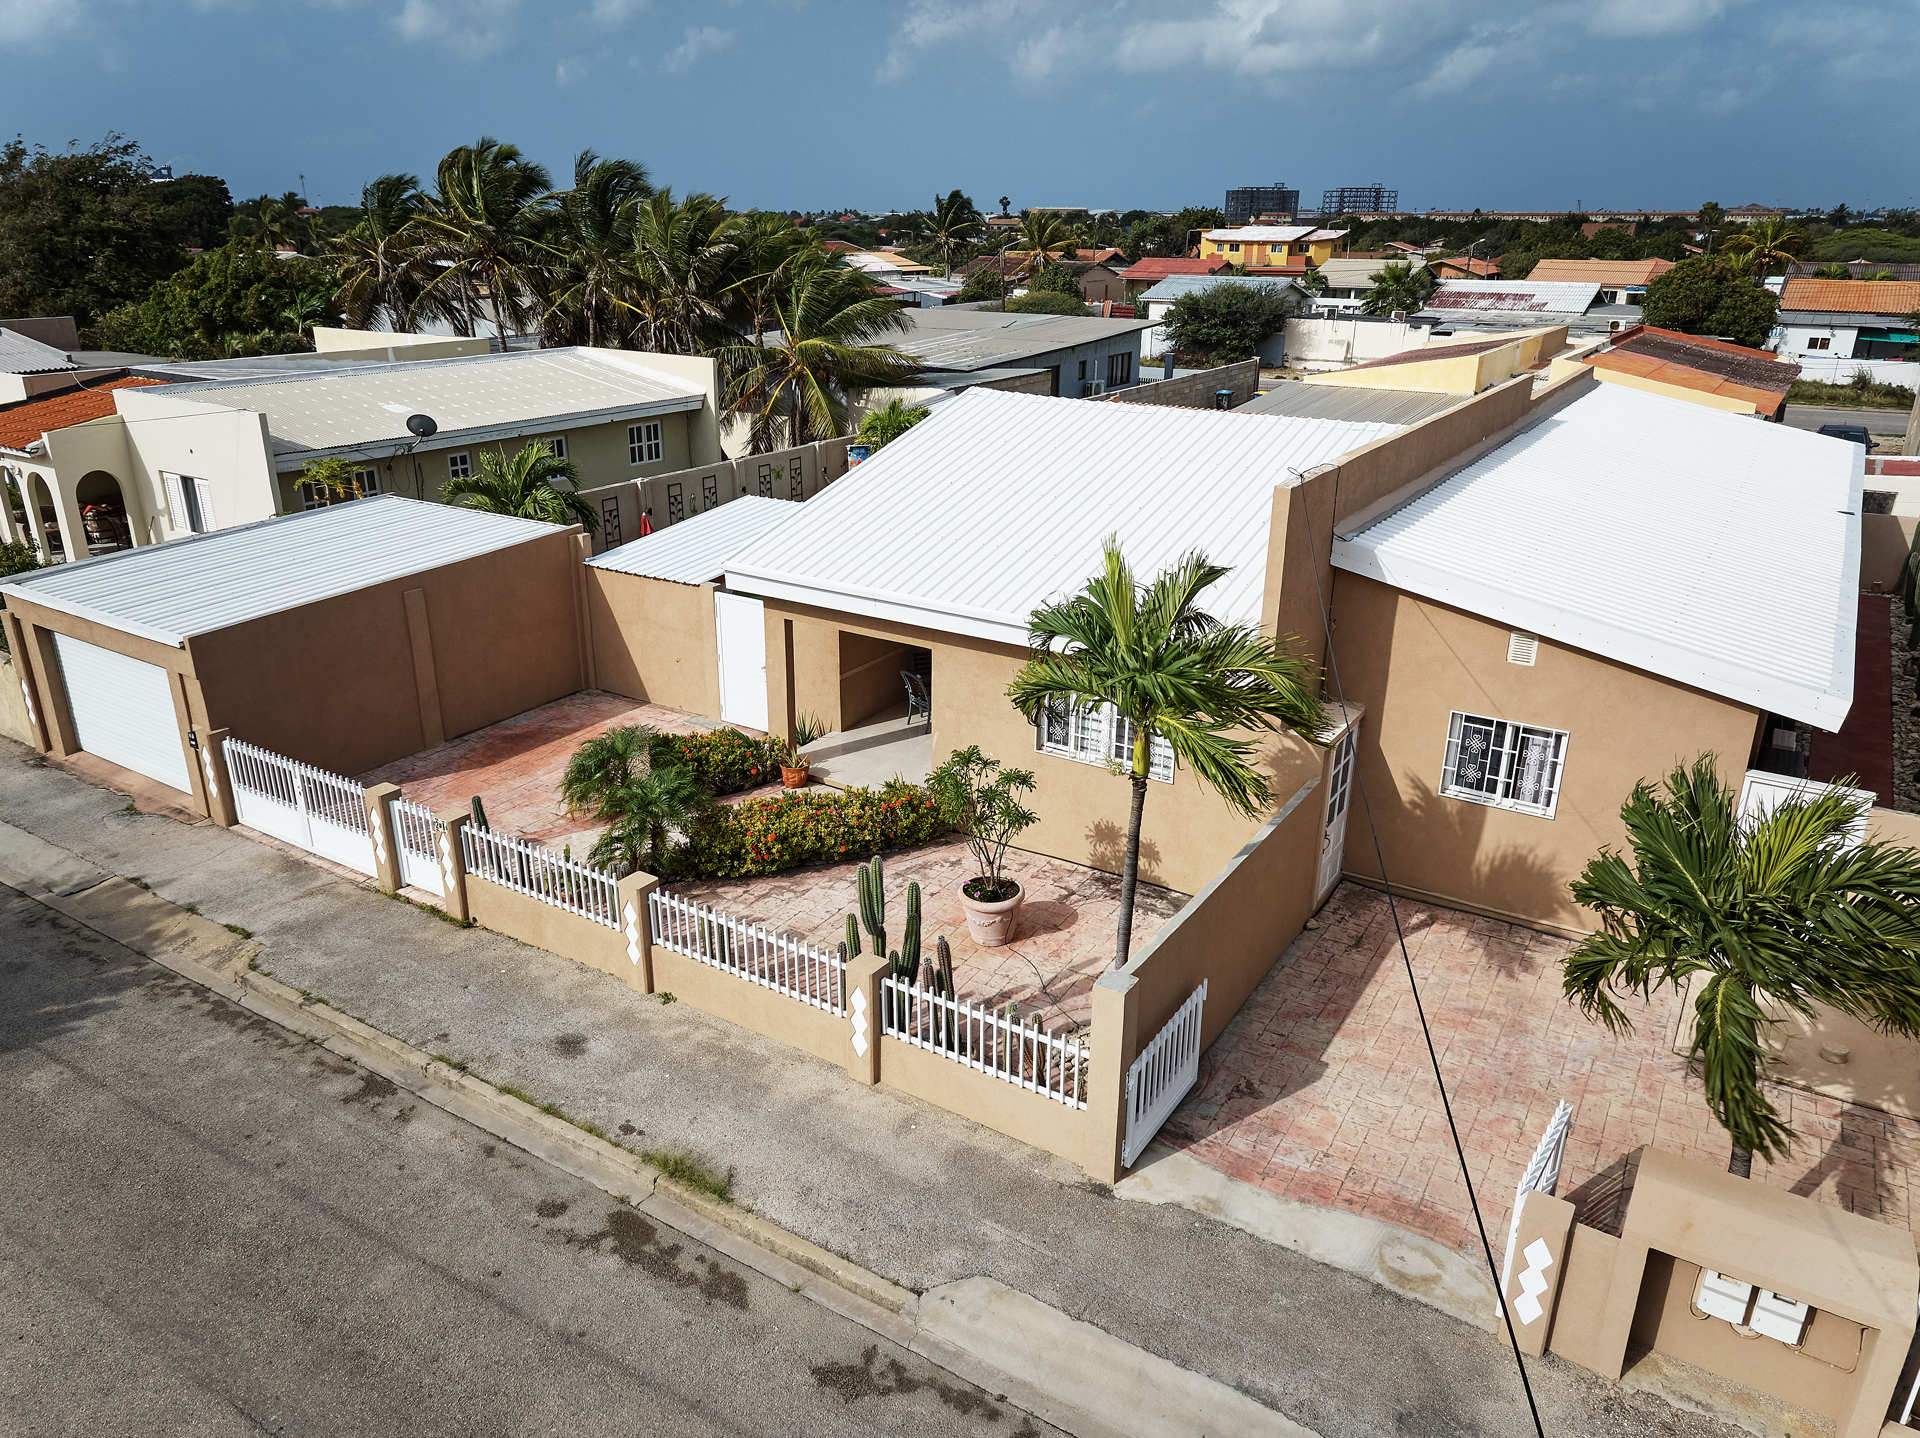 Caya Frere Family Home, Oranjestad, AW, 4 Bedrooms Bedrooms, ,3 BathroomsBathrooms,Residential,For Sale,Caya Frere Family Home,1472526